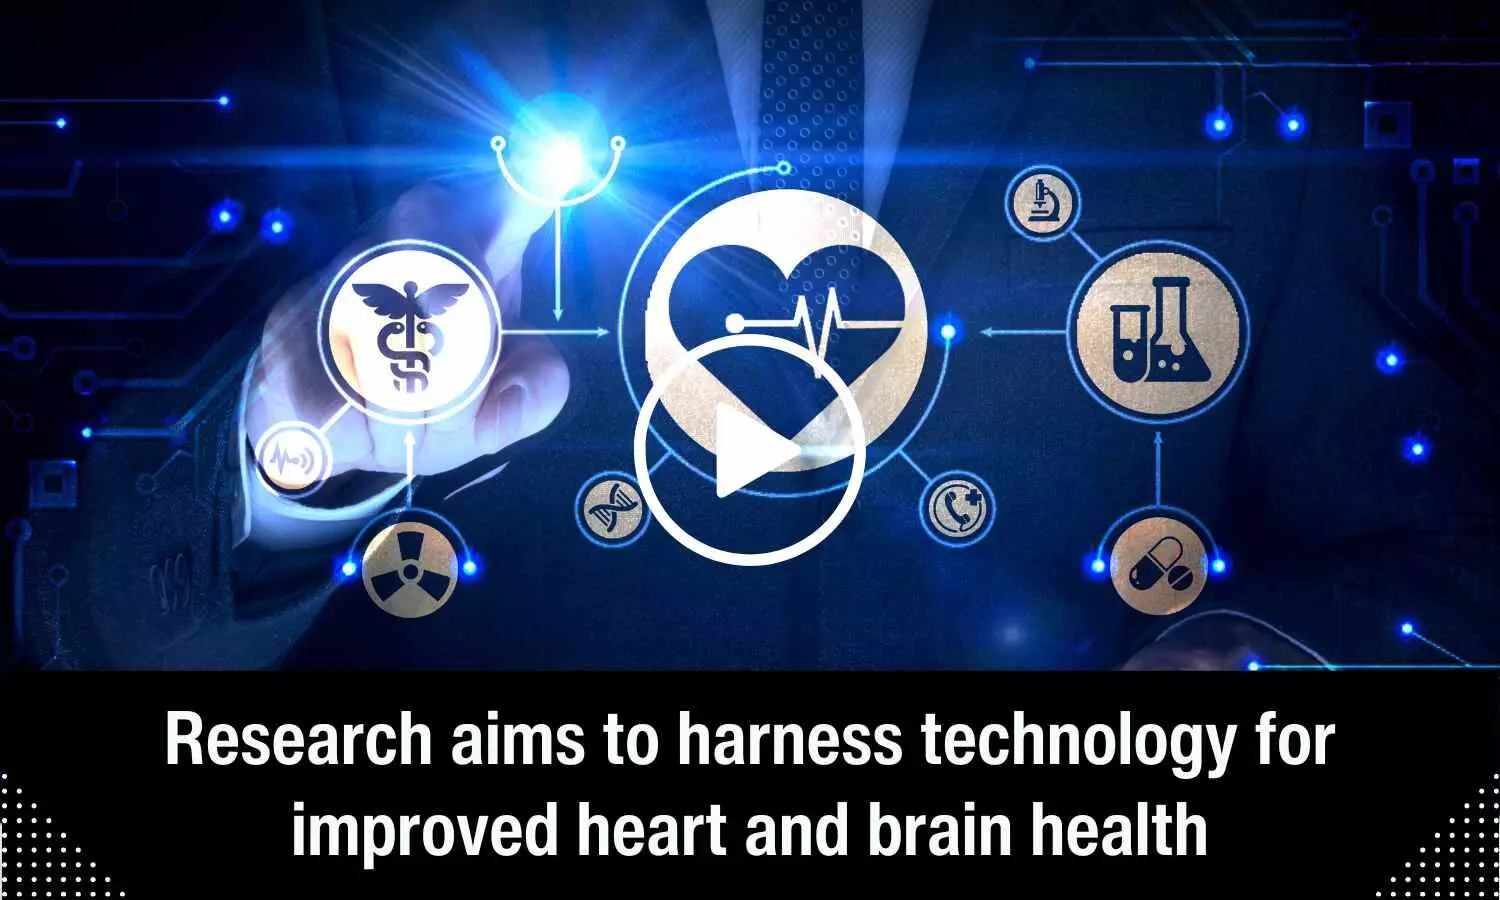 Research aims to harness technology for improved heart and brain health